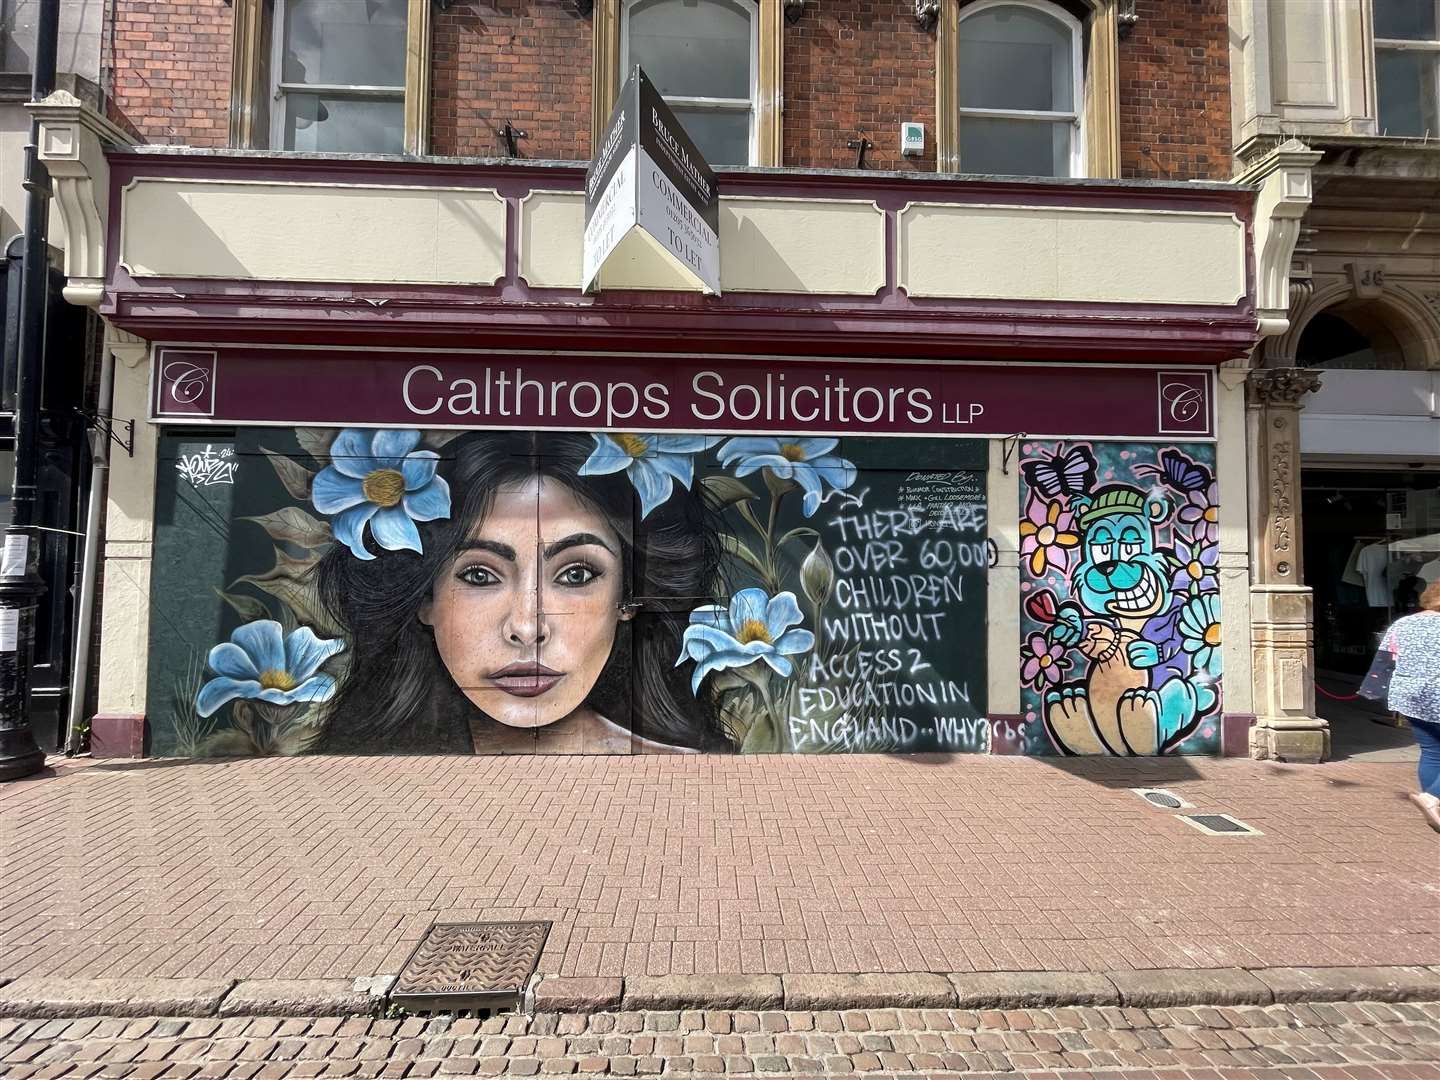 The mural outside the former Calthrops site